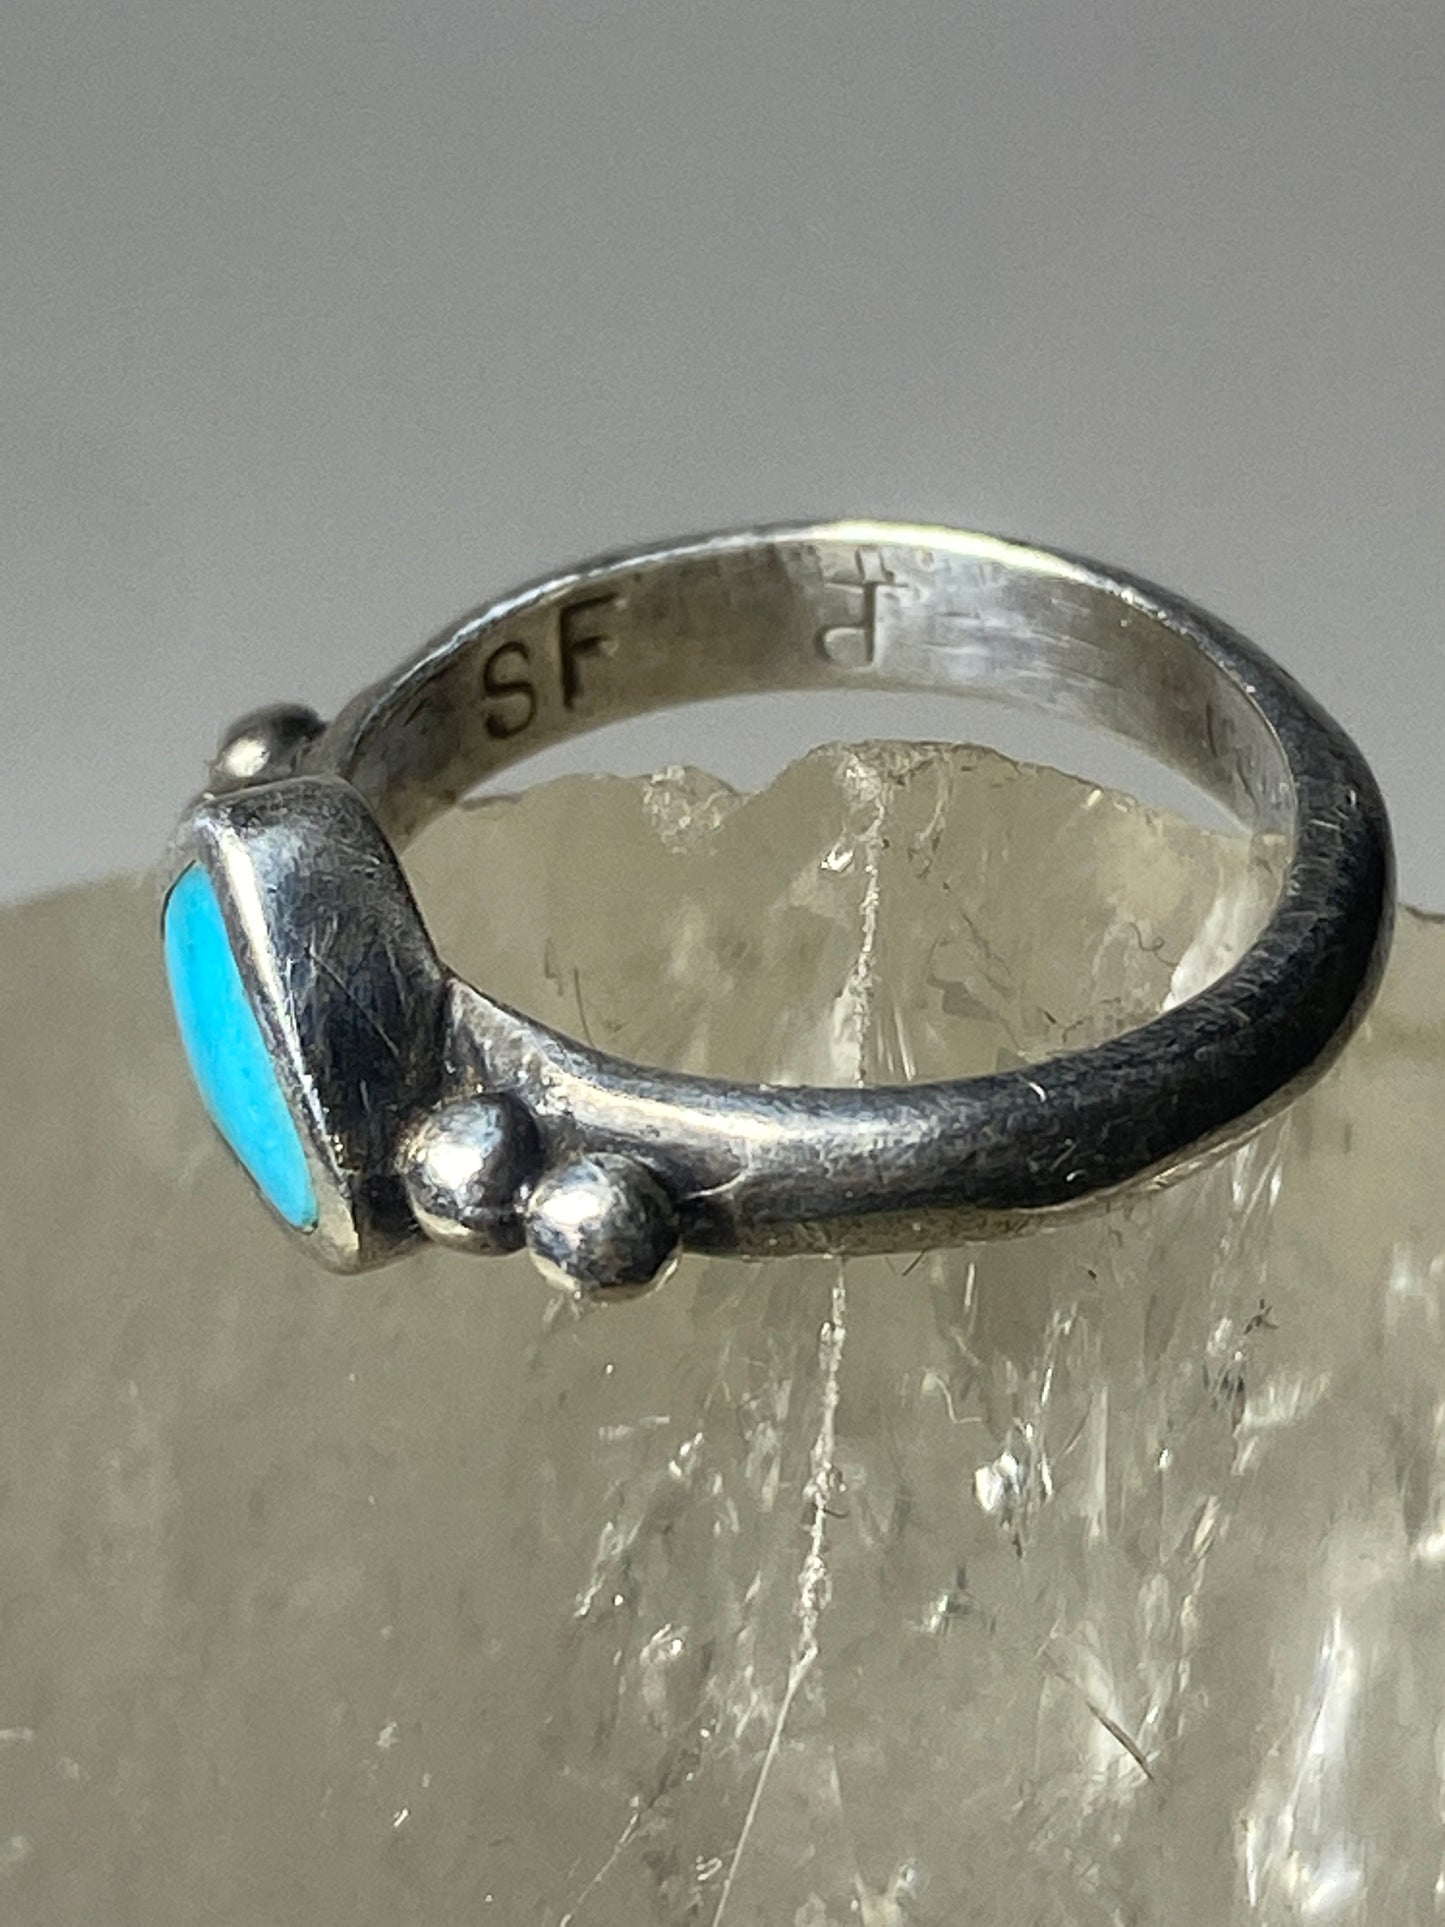 Heart ring turquoise southwest love Valentine baby pinky band sterling silver women girl